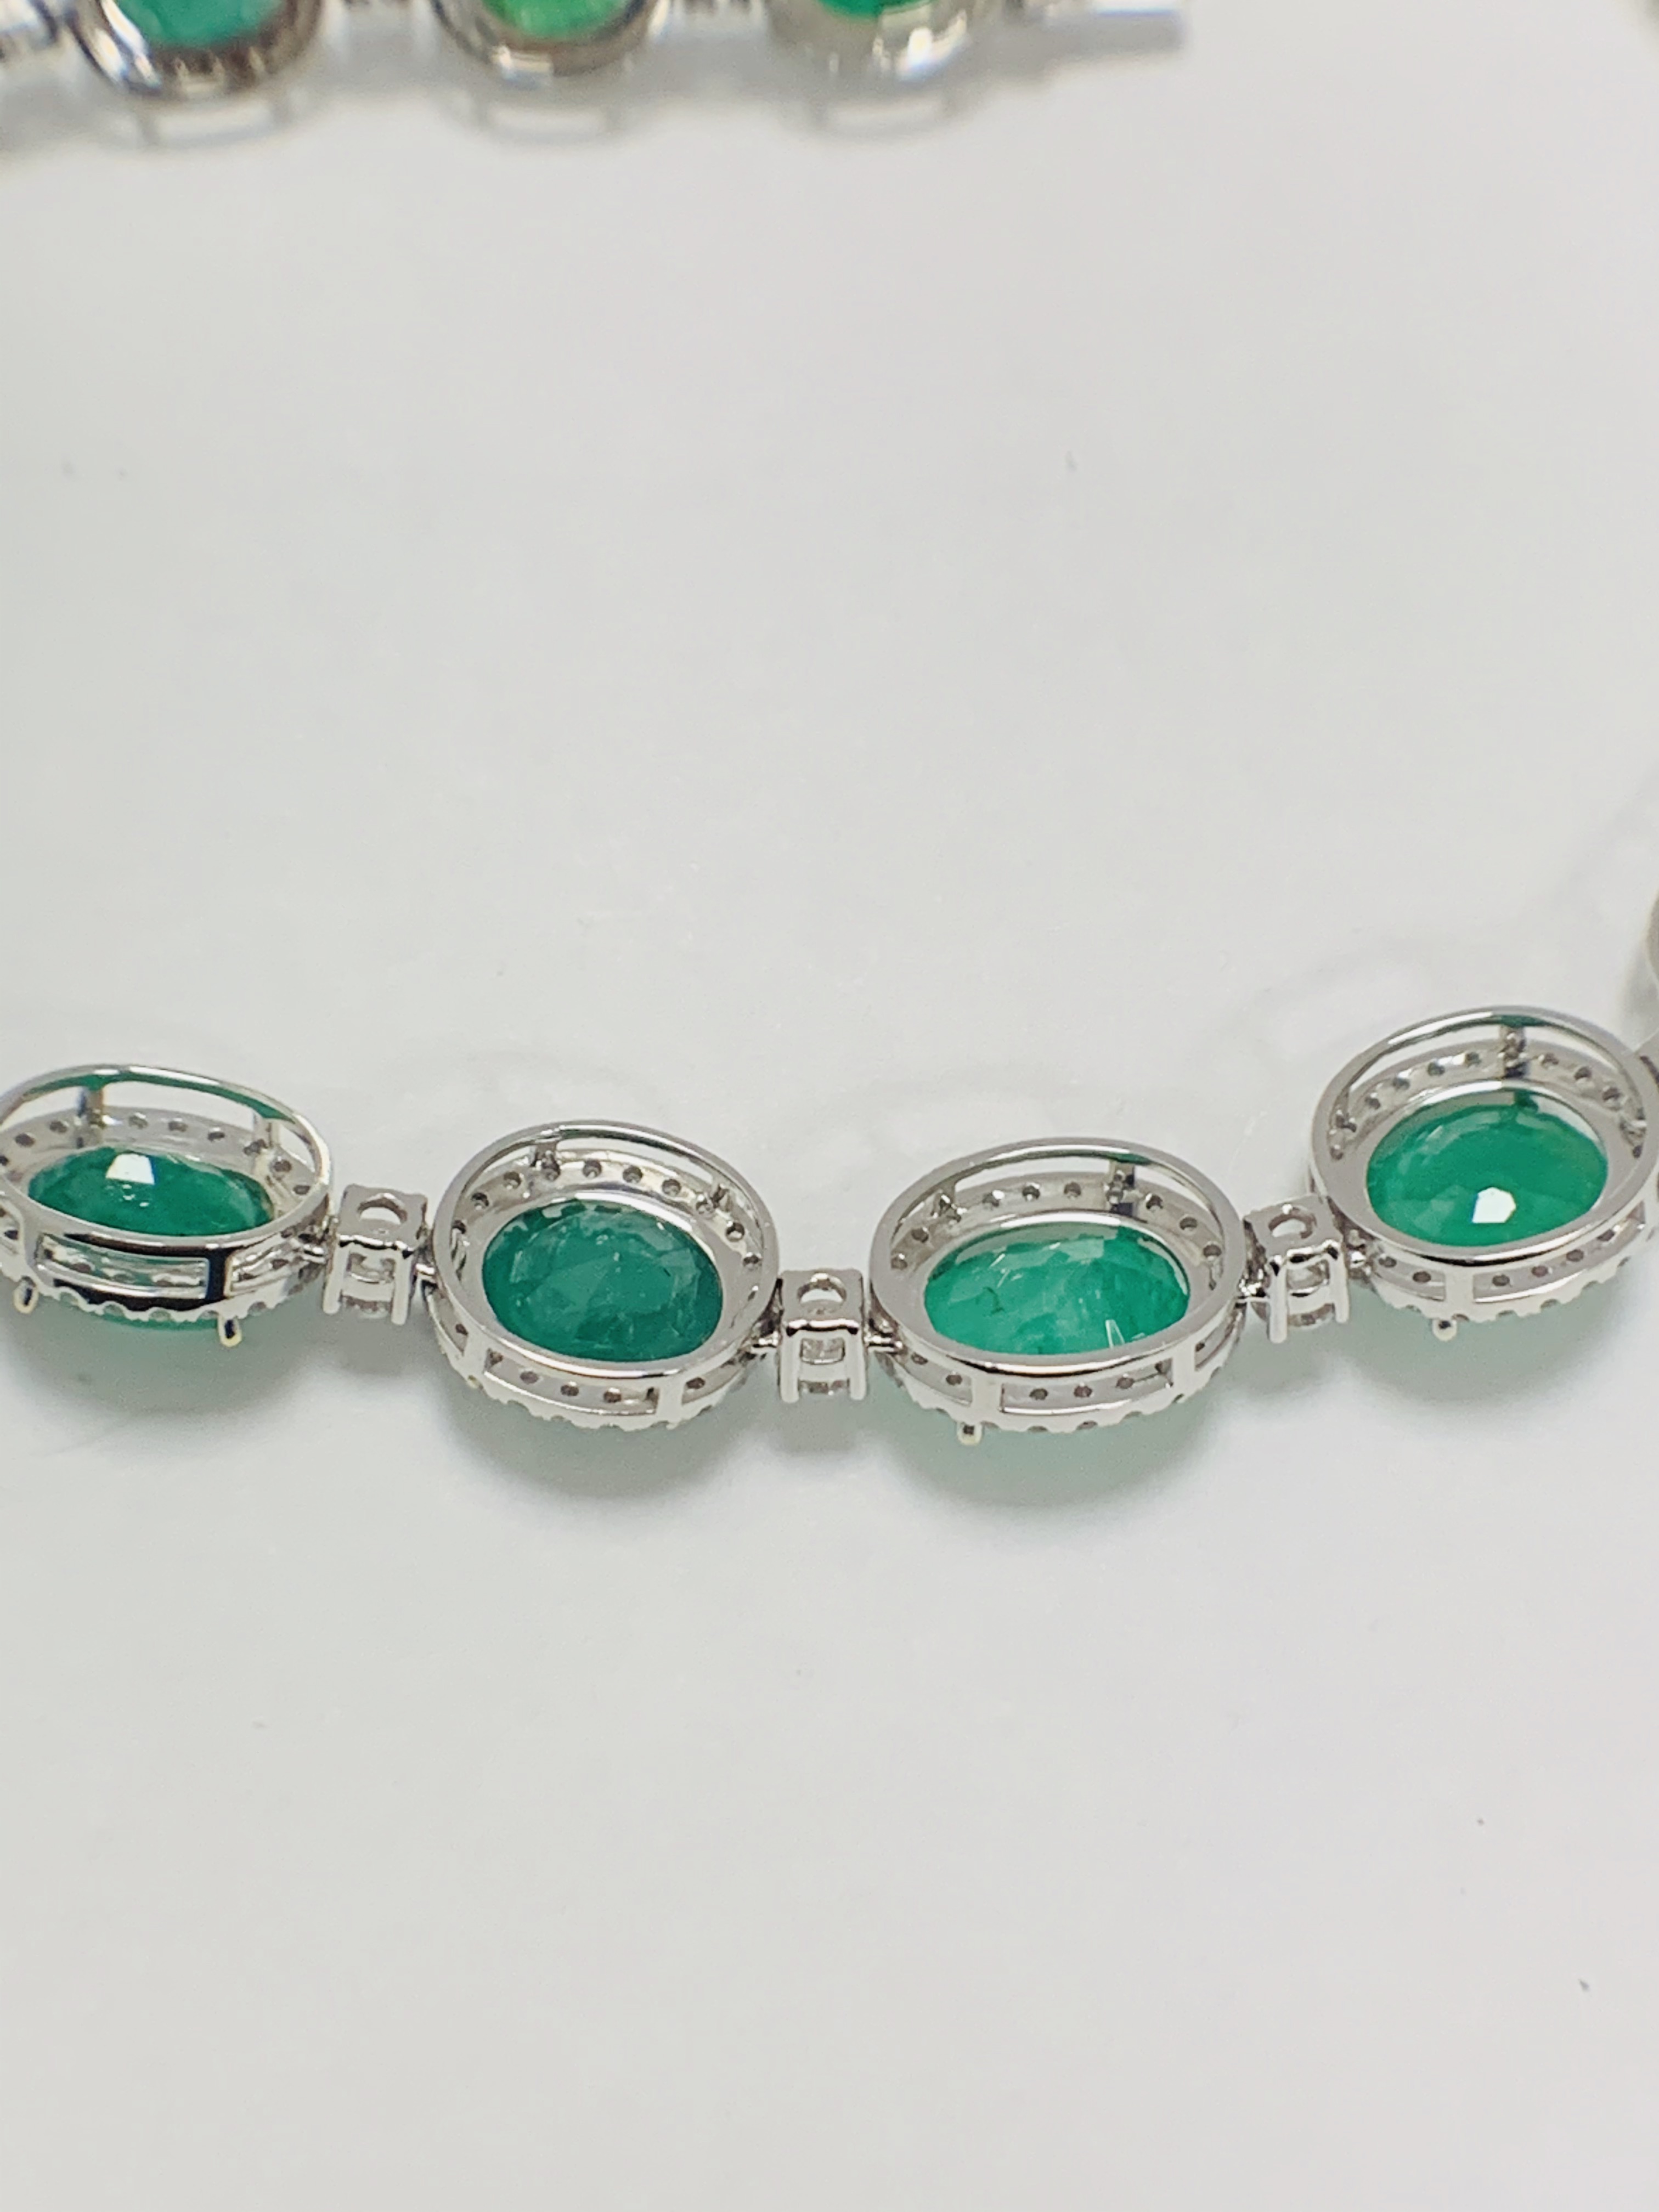 Platinum and Yellow Gold Emerald and Diamond necklace featuring, 29 oval cut, light to deep green Em - Image 16 of 36